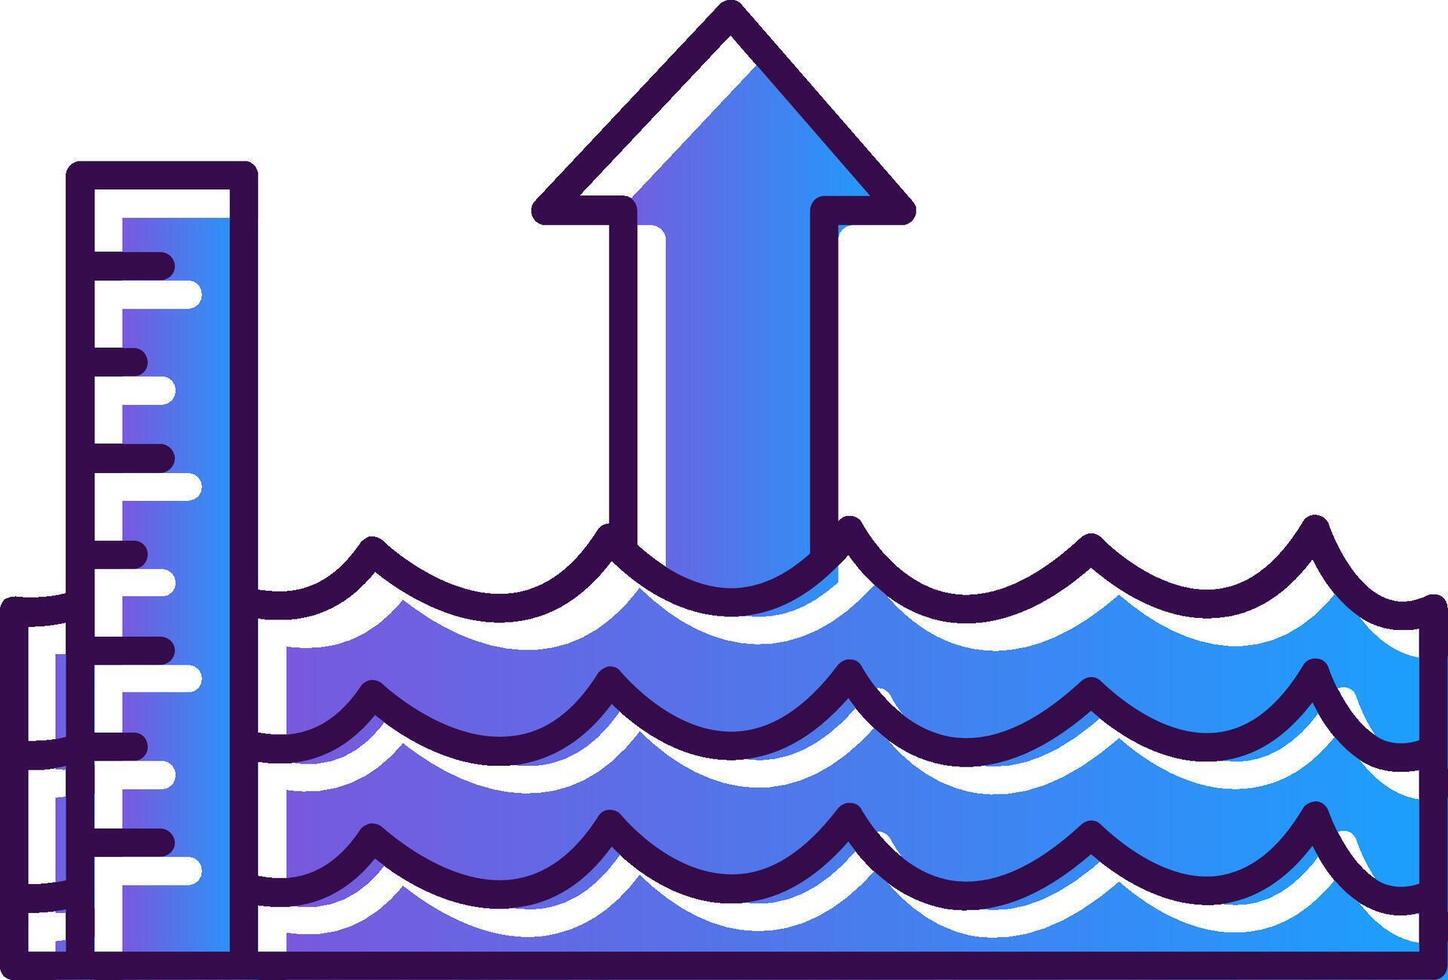 Sea Level Rise Gradient Filled Icon vector